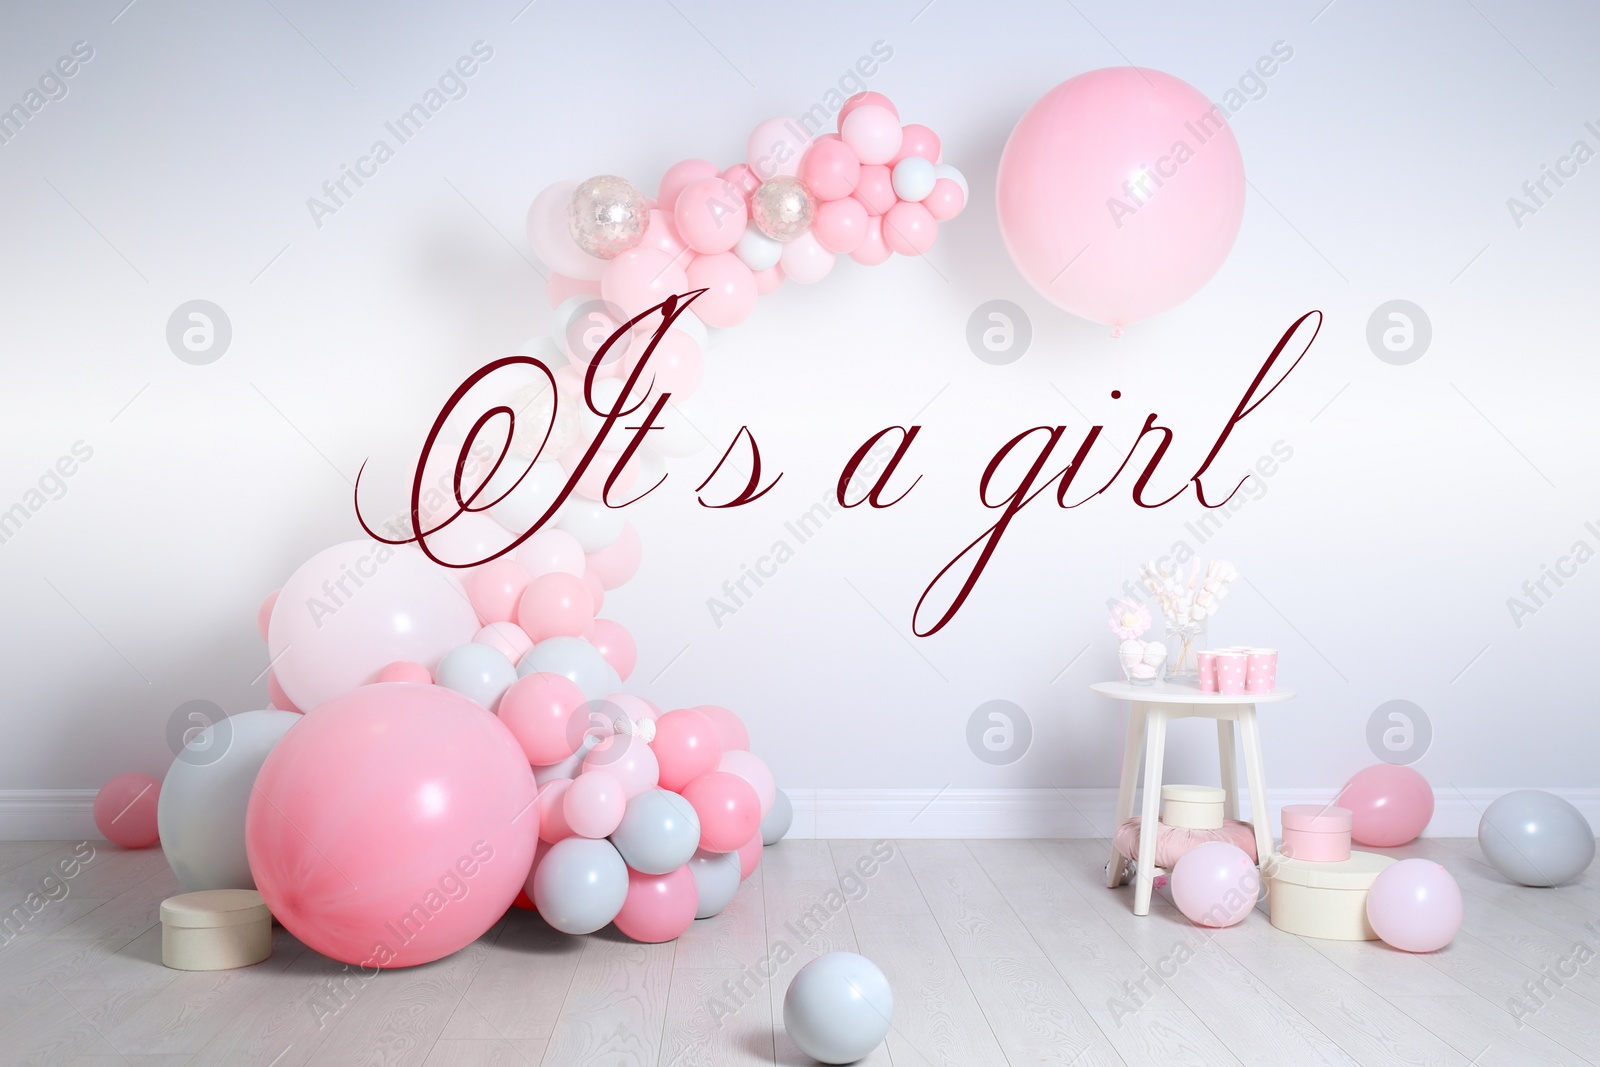 Image of Baby shower party for girl. Balloons and sweets in room 